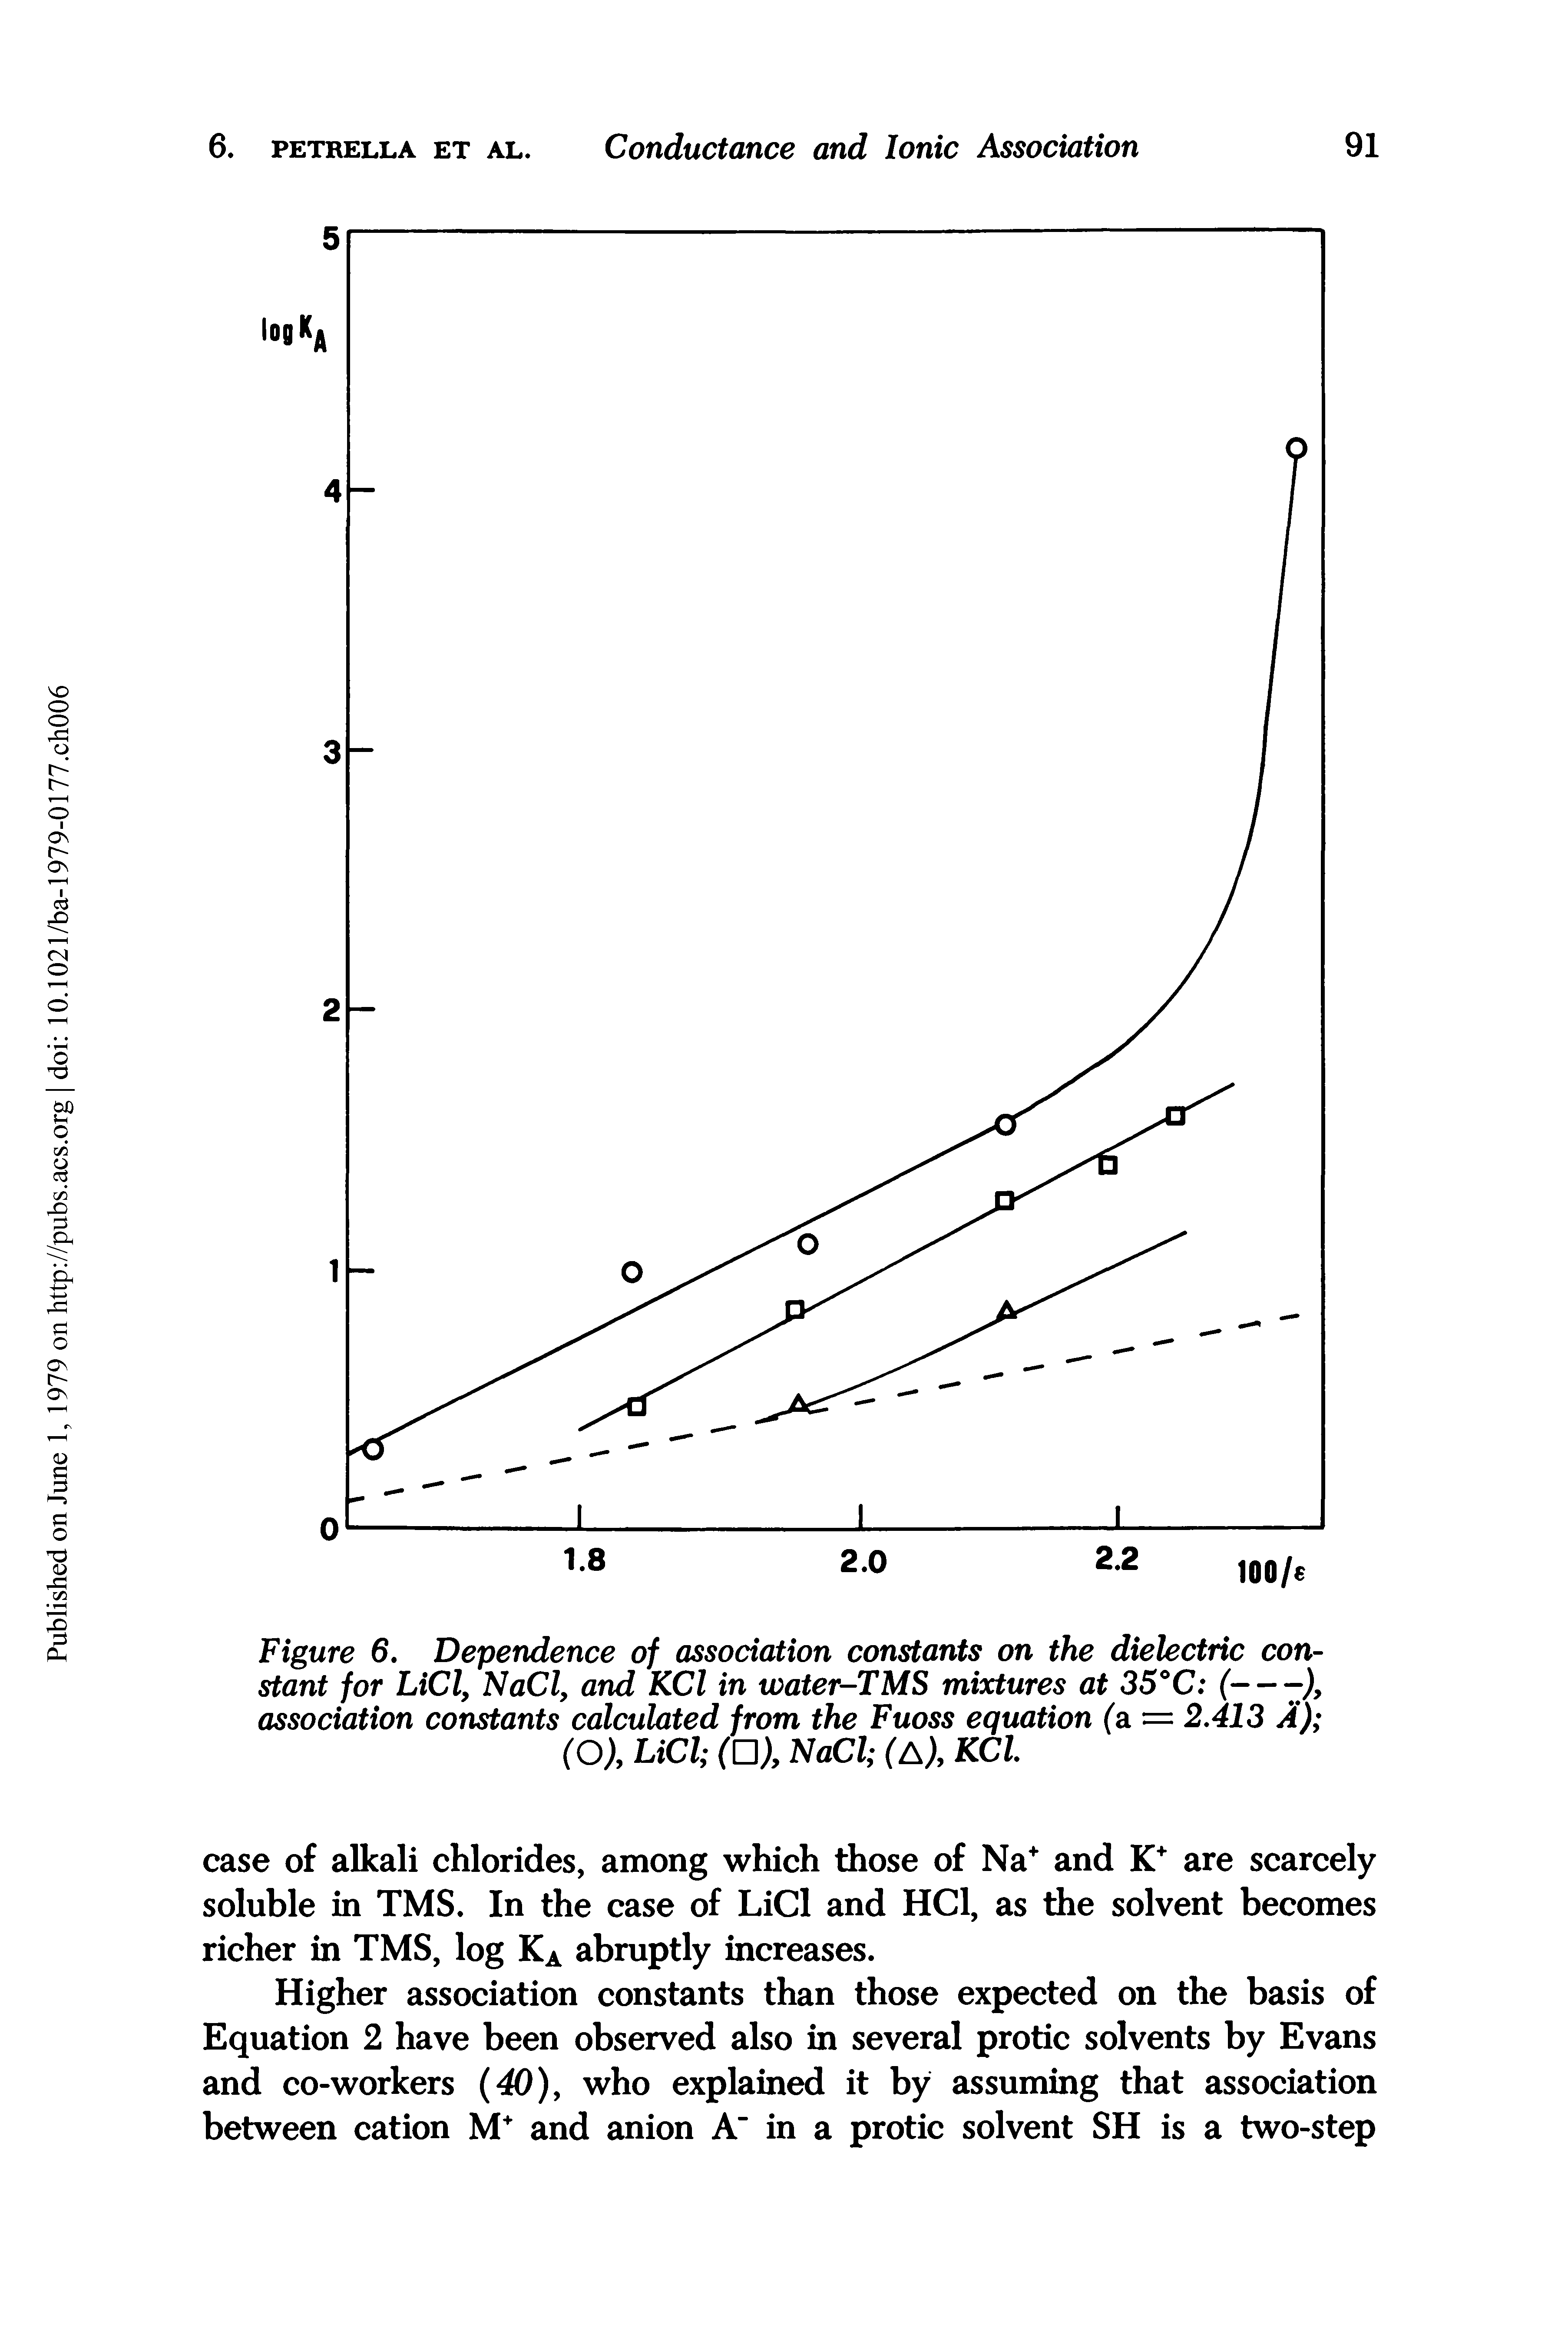 Figure 6. Dependence of association constants on the dielectric constant for LiCl, NaCl, and KCl in water-TMS mixtures at 35°C (—-), association constants calculated from the Fuoss equation (a = 2.413 A) (O), LiCl (U), NaCl (A), KCl...